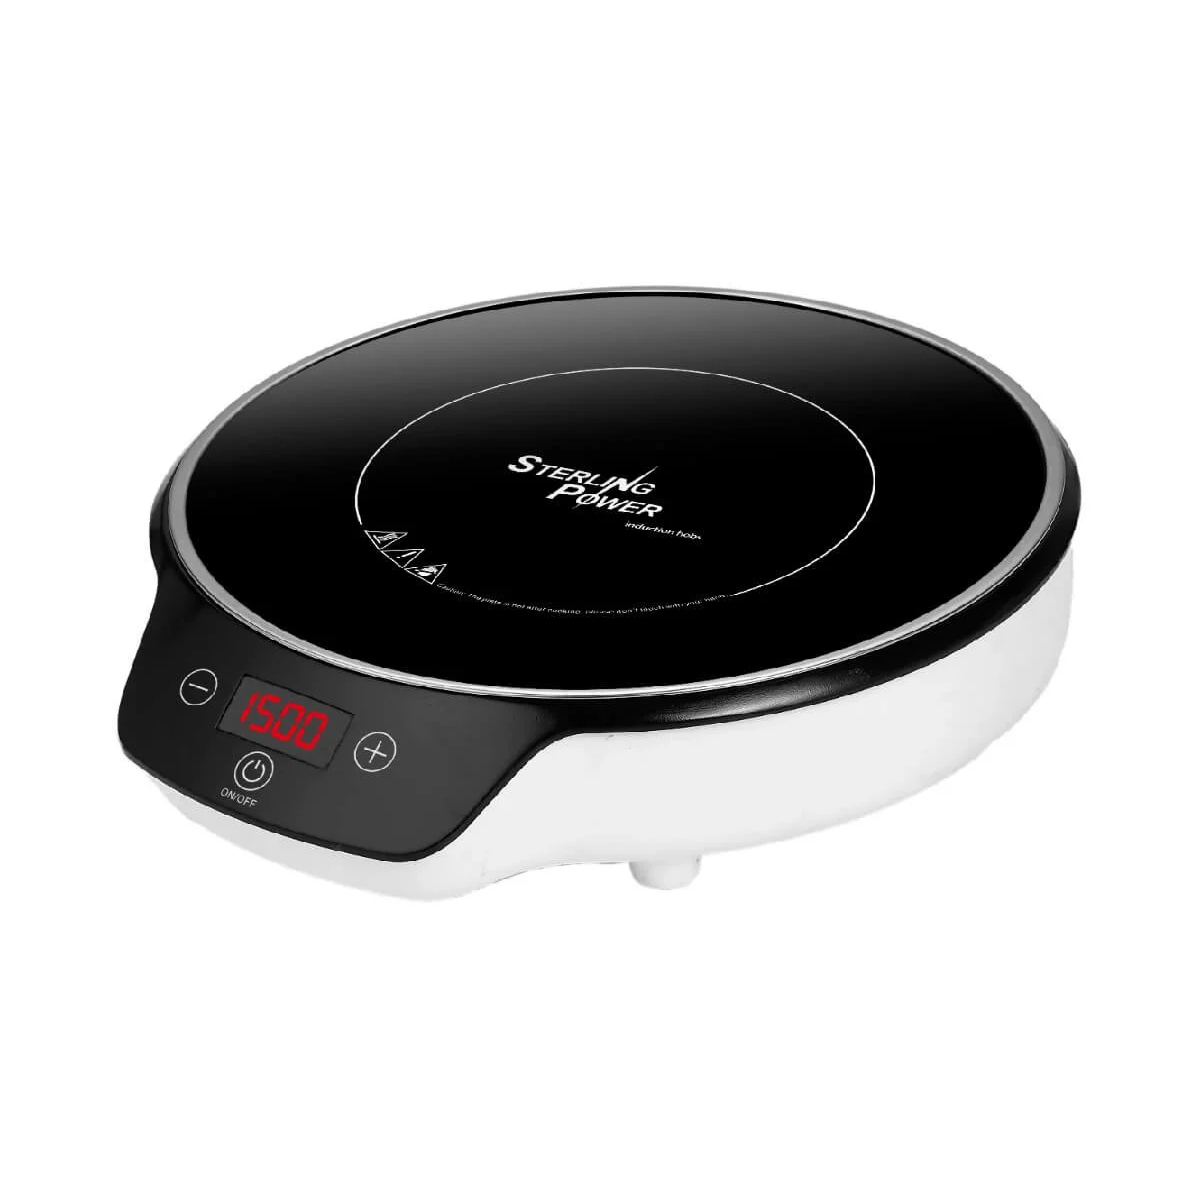 Sterling Power Induction Hob - Portable, Single Ring